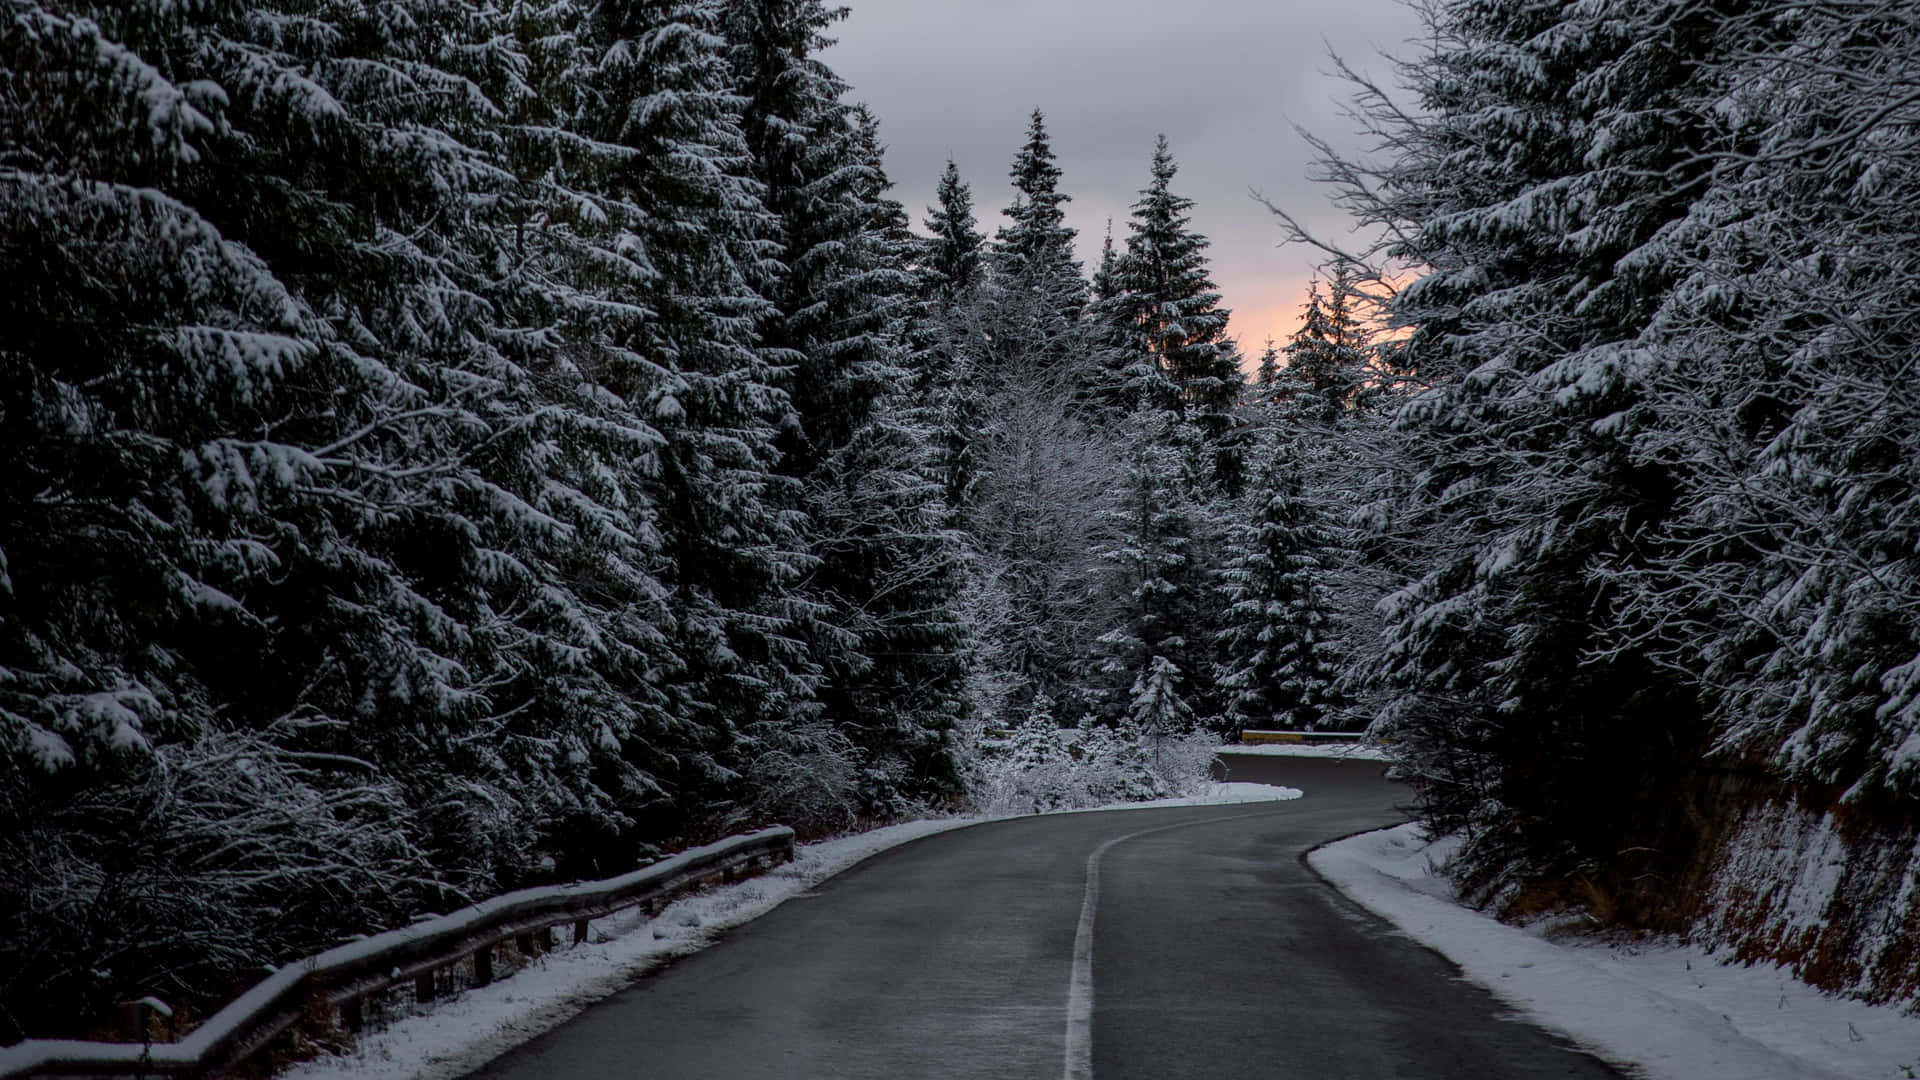 Serene Snowy Road Guided by Tree Lined Path Wallpaper